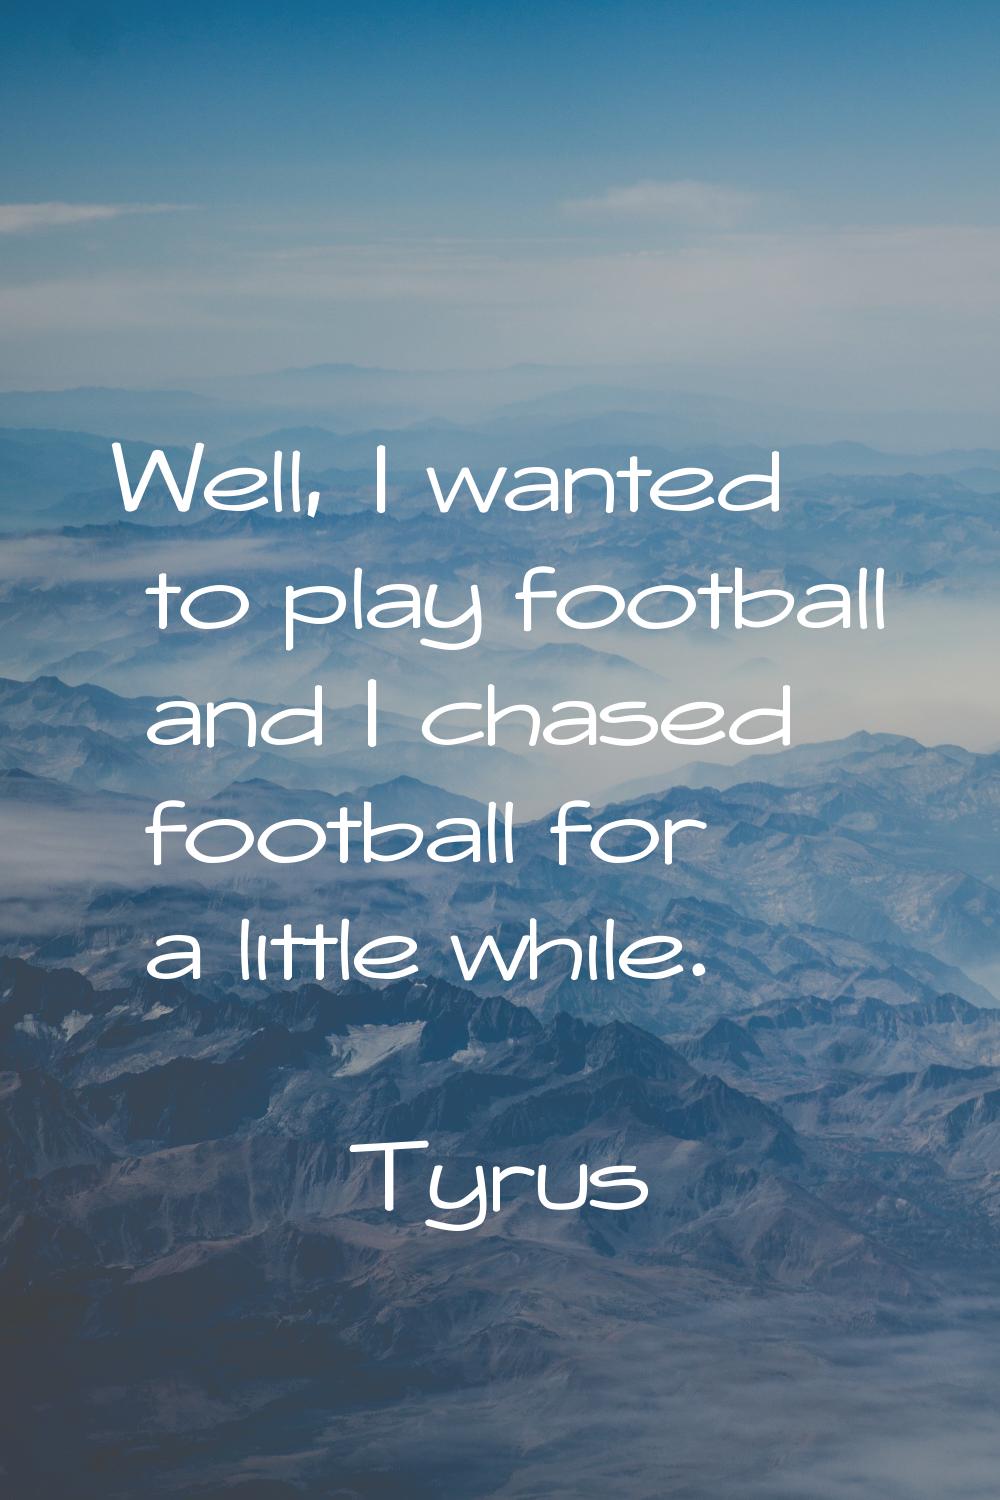 Well, I wanted to play football and I chased football for a little while.